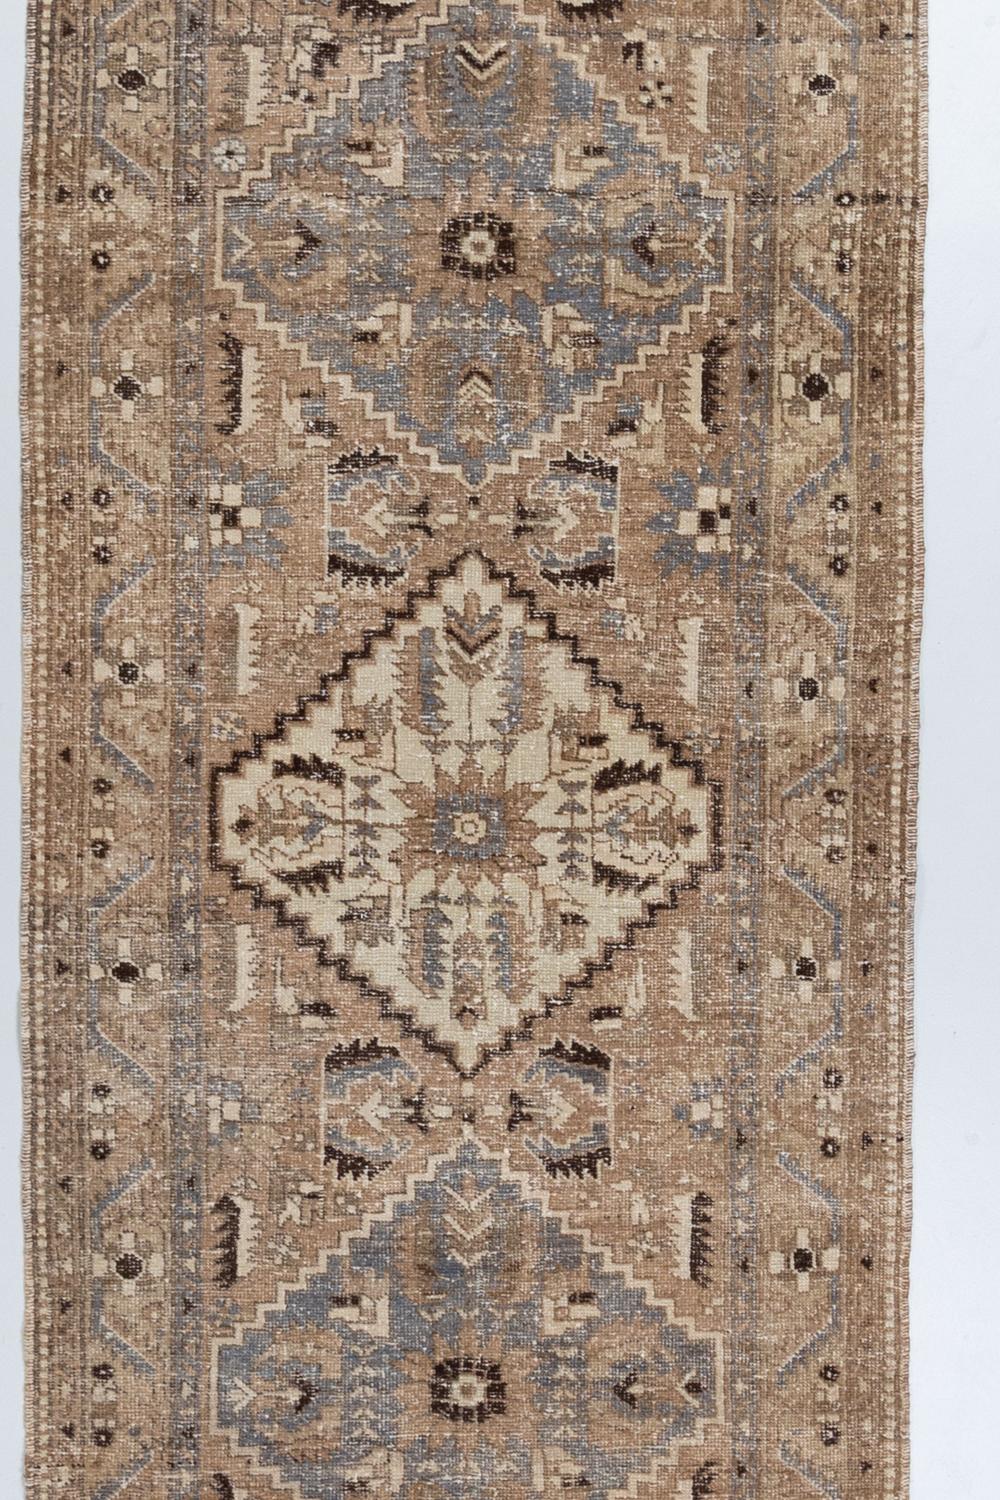 Age: 1930

Pile: low

Wear Notes: 2

Material: wool on cotton

Vintage rugs are made by hand over the course of months, sometimes years. Their imperfections and wear are evidence of the hard working human hands that made them and the